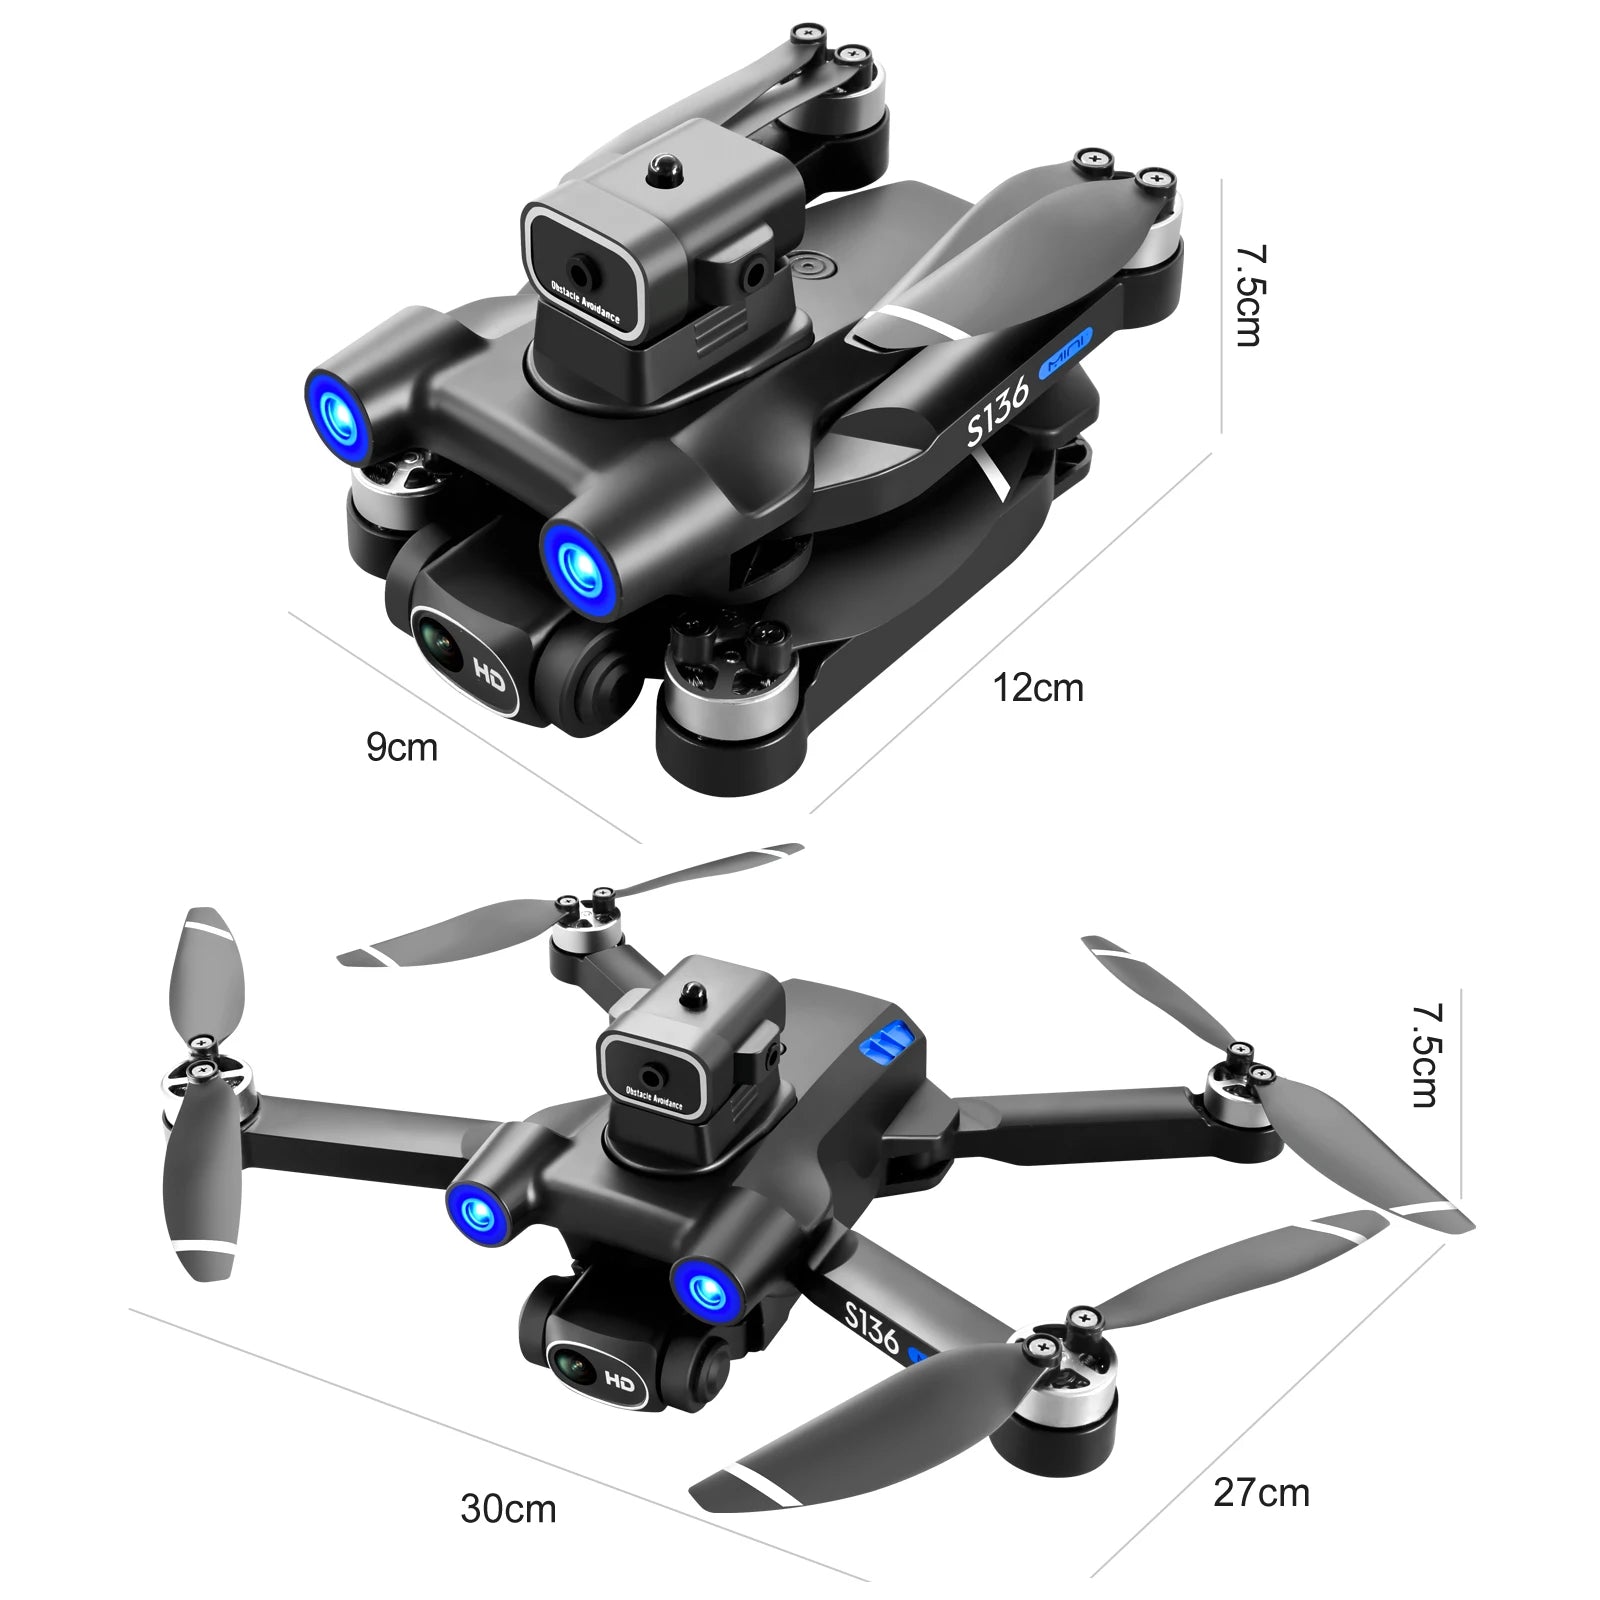 S136 GPS Drone, the drone is equipped with a removable and replaceable battery, ensuring extended flight sessions